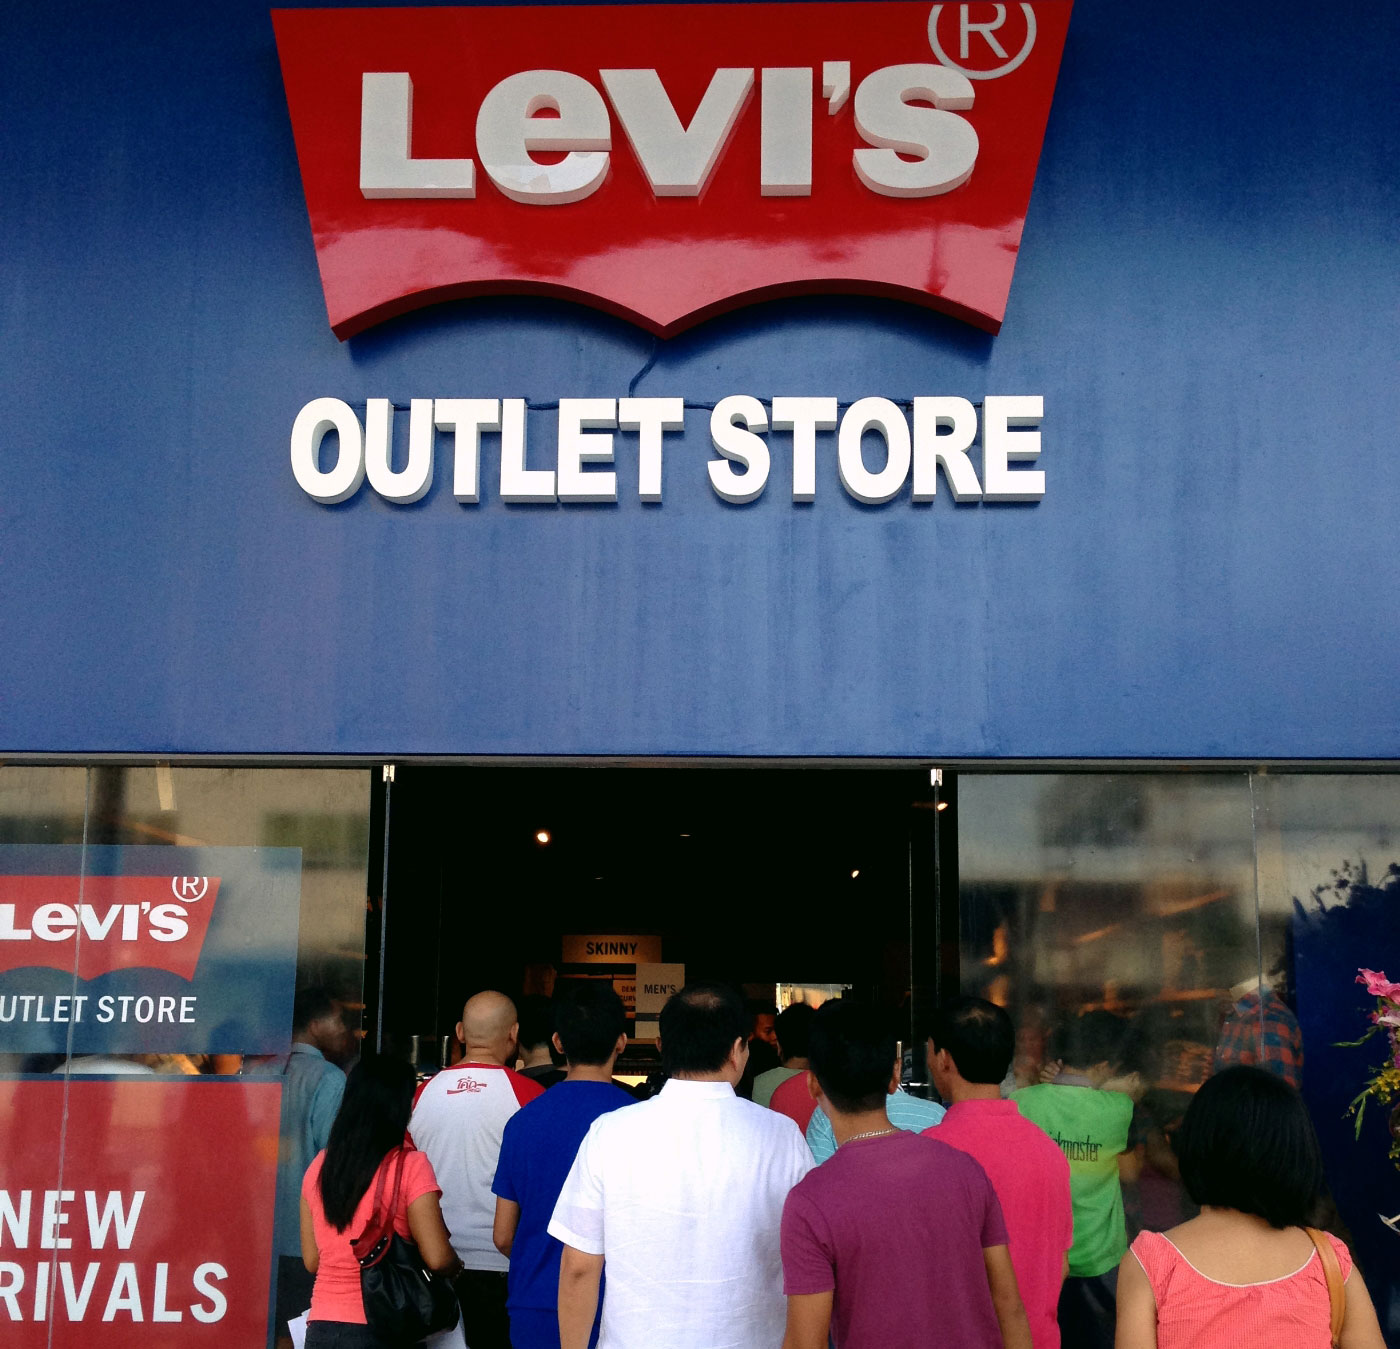 Customers crowd the Levi's outlet, which also sells Dockers apparel, in The Outlets at Pueblo Verde in Lapu-Lapu City. The Outlets is the first outlet store in Visayas and Mindanao where manufacturers directly sell goods to consumers at a big discount.